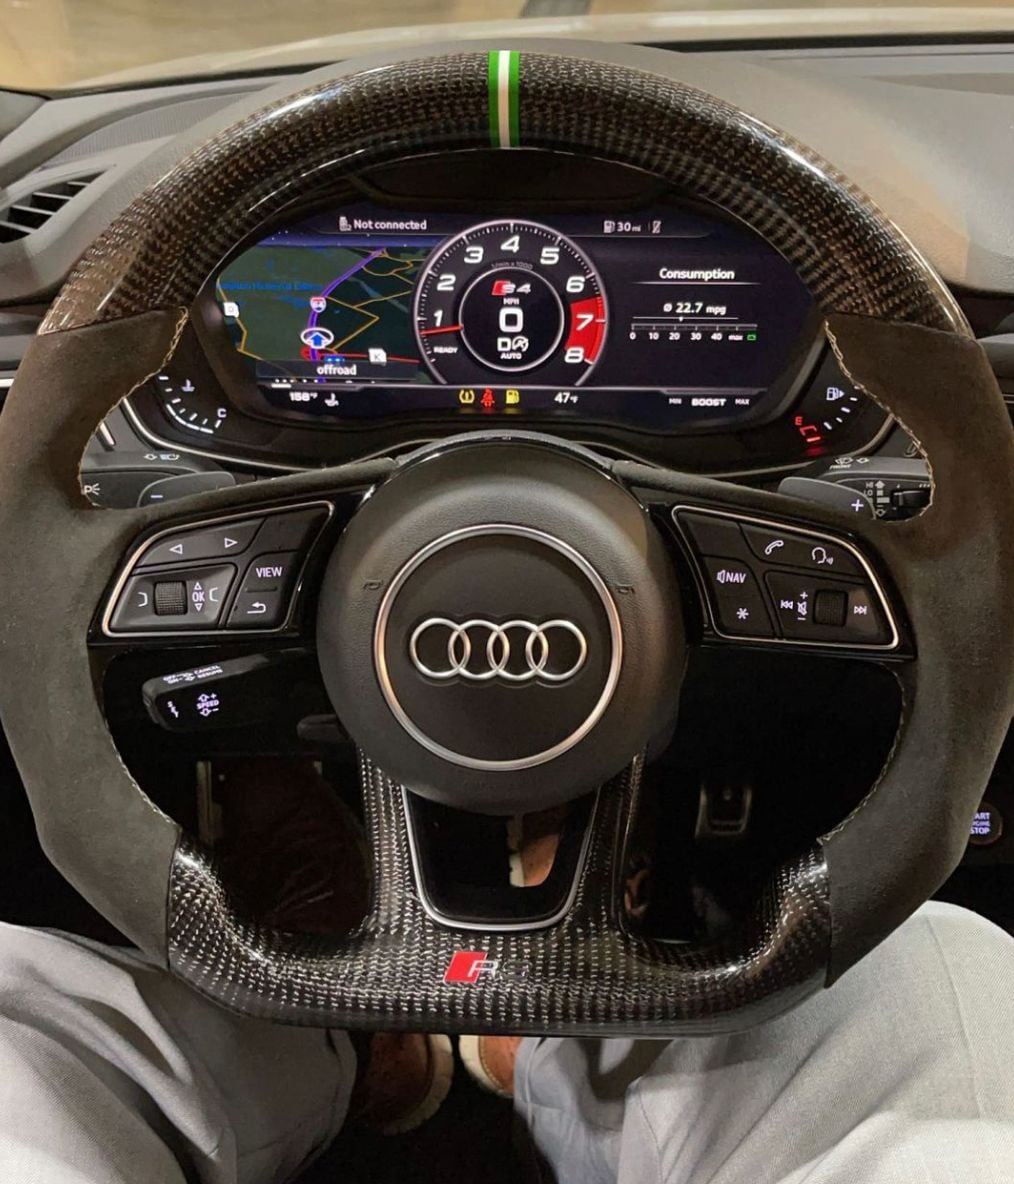 Interior/Upholstery - Carbon Fiber Steering Wheel (Heated & Non-Heated) - New - 2017 to 2020 Audi A4 - 2017 to 2019 Audi A3 - 2017 to 2020 Audi A5 - 2017 to 2020 Audi S4 - 2017 to 2020 Audi S5 - 2016 to 2018 Audi Q3 - St. Louis, MO 63011, United States